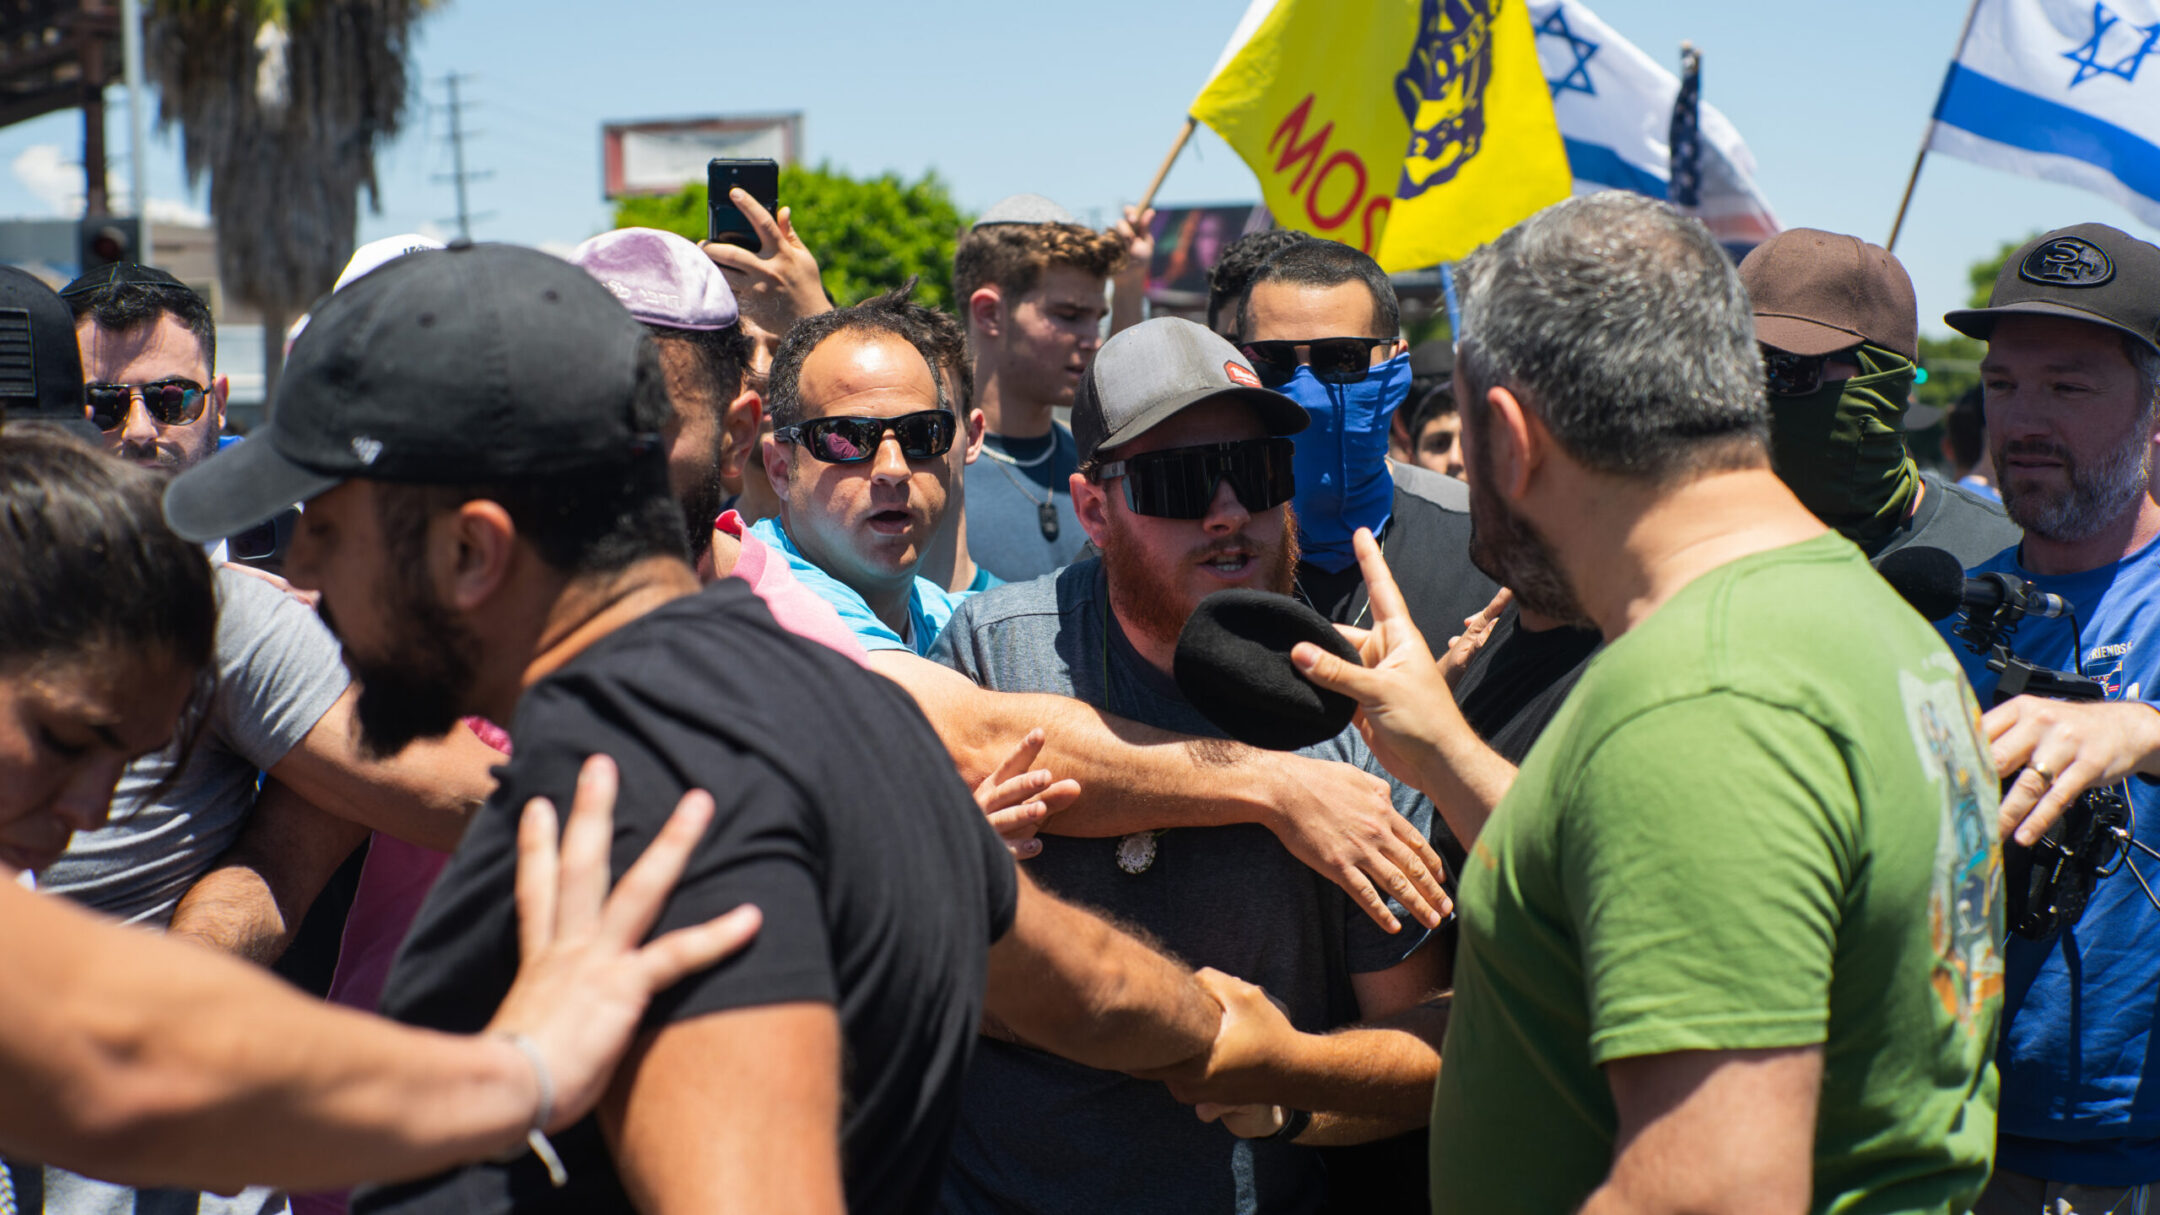 Pro-Palestinian and pro-Israel protesters clash outside a synagogue in Los Angeles June 23.